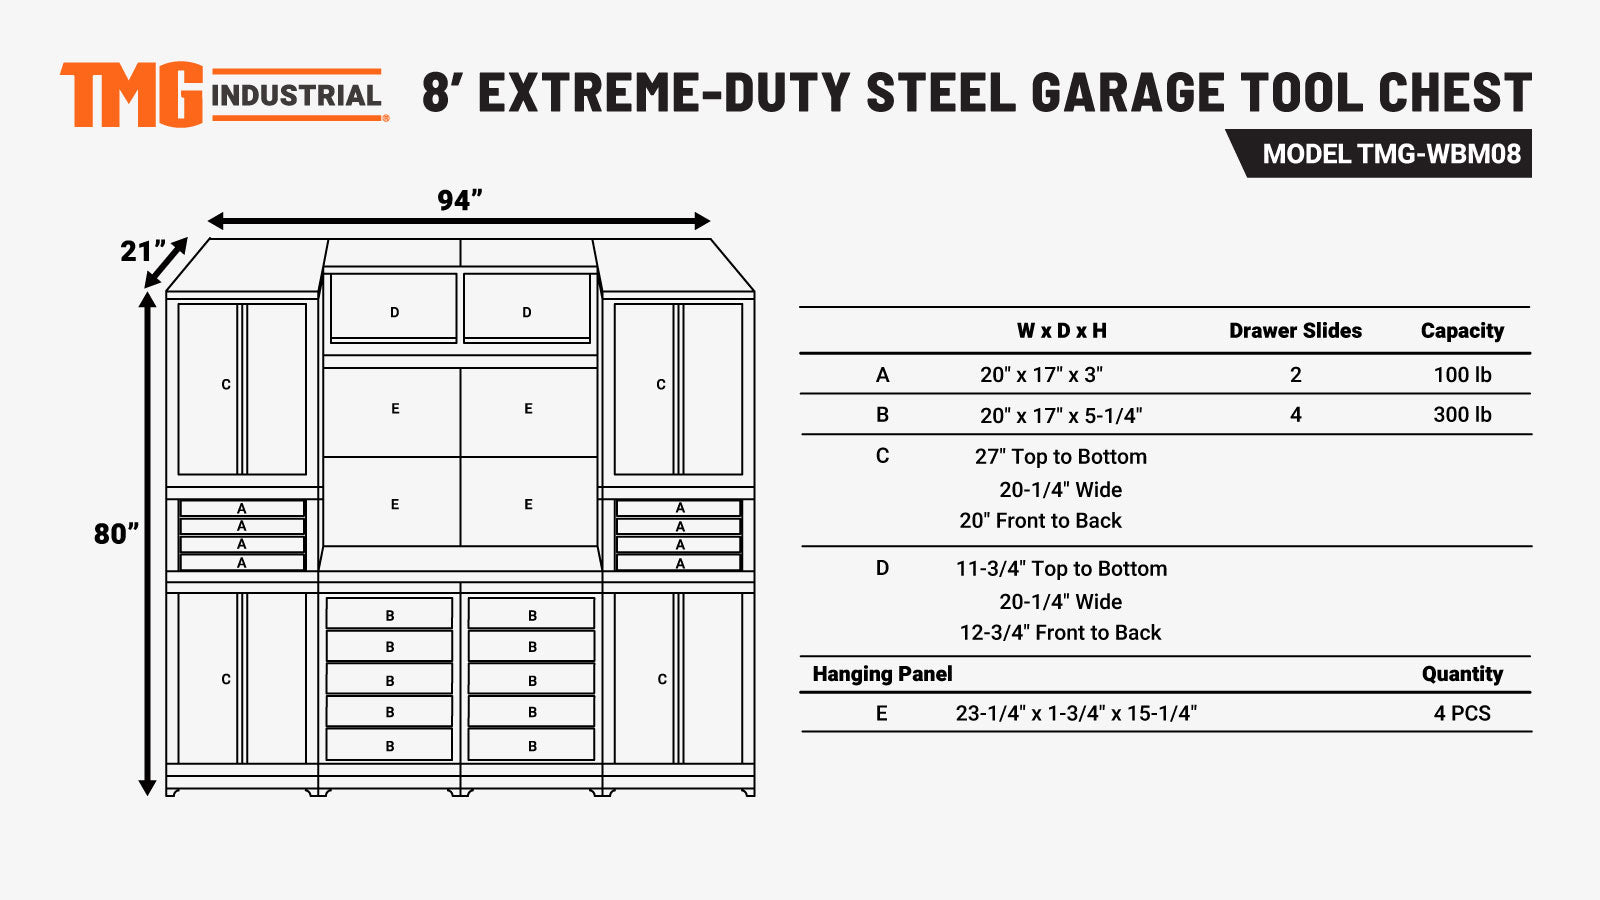 TMG Industrial 8’ Extreme-Duty Steel Garage Tool Chest w/Pegboard, 18 Drawers and Multi Cabinets, Power Outlets, USB Port, Magnetic Motion LED Lamps, TMG-WBM08-specifications-image